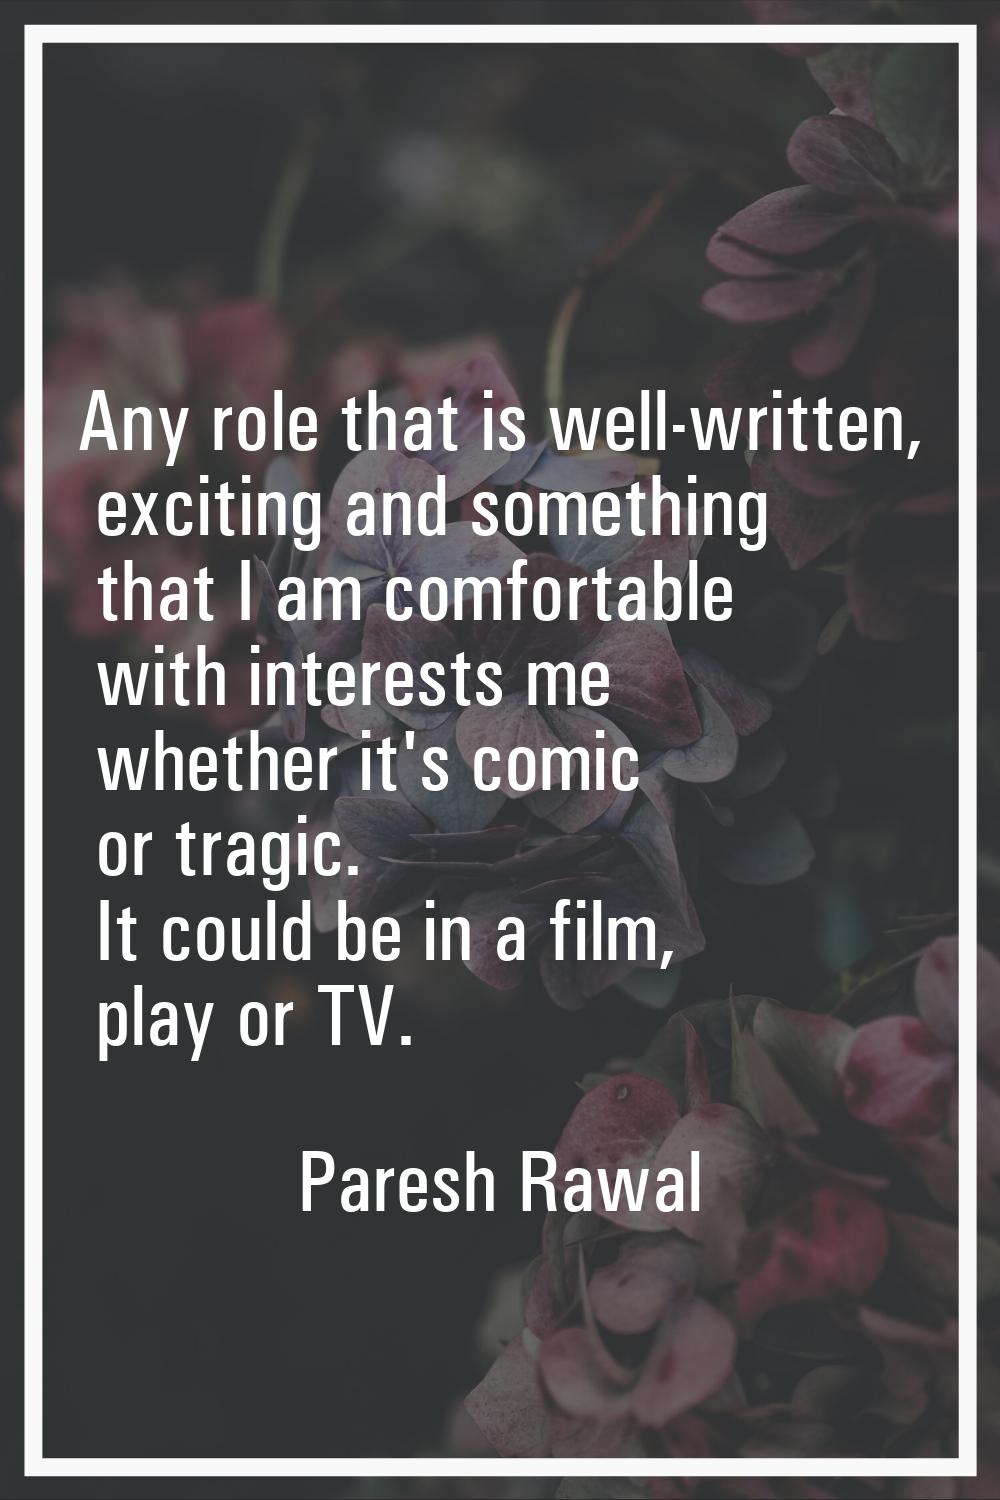 Any role that is well-written, exciting and something that I am comfortable with interests me wheth